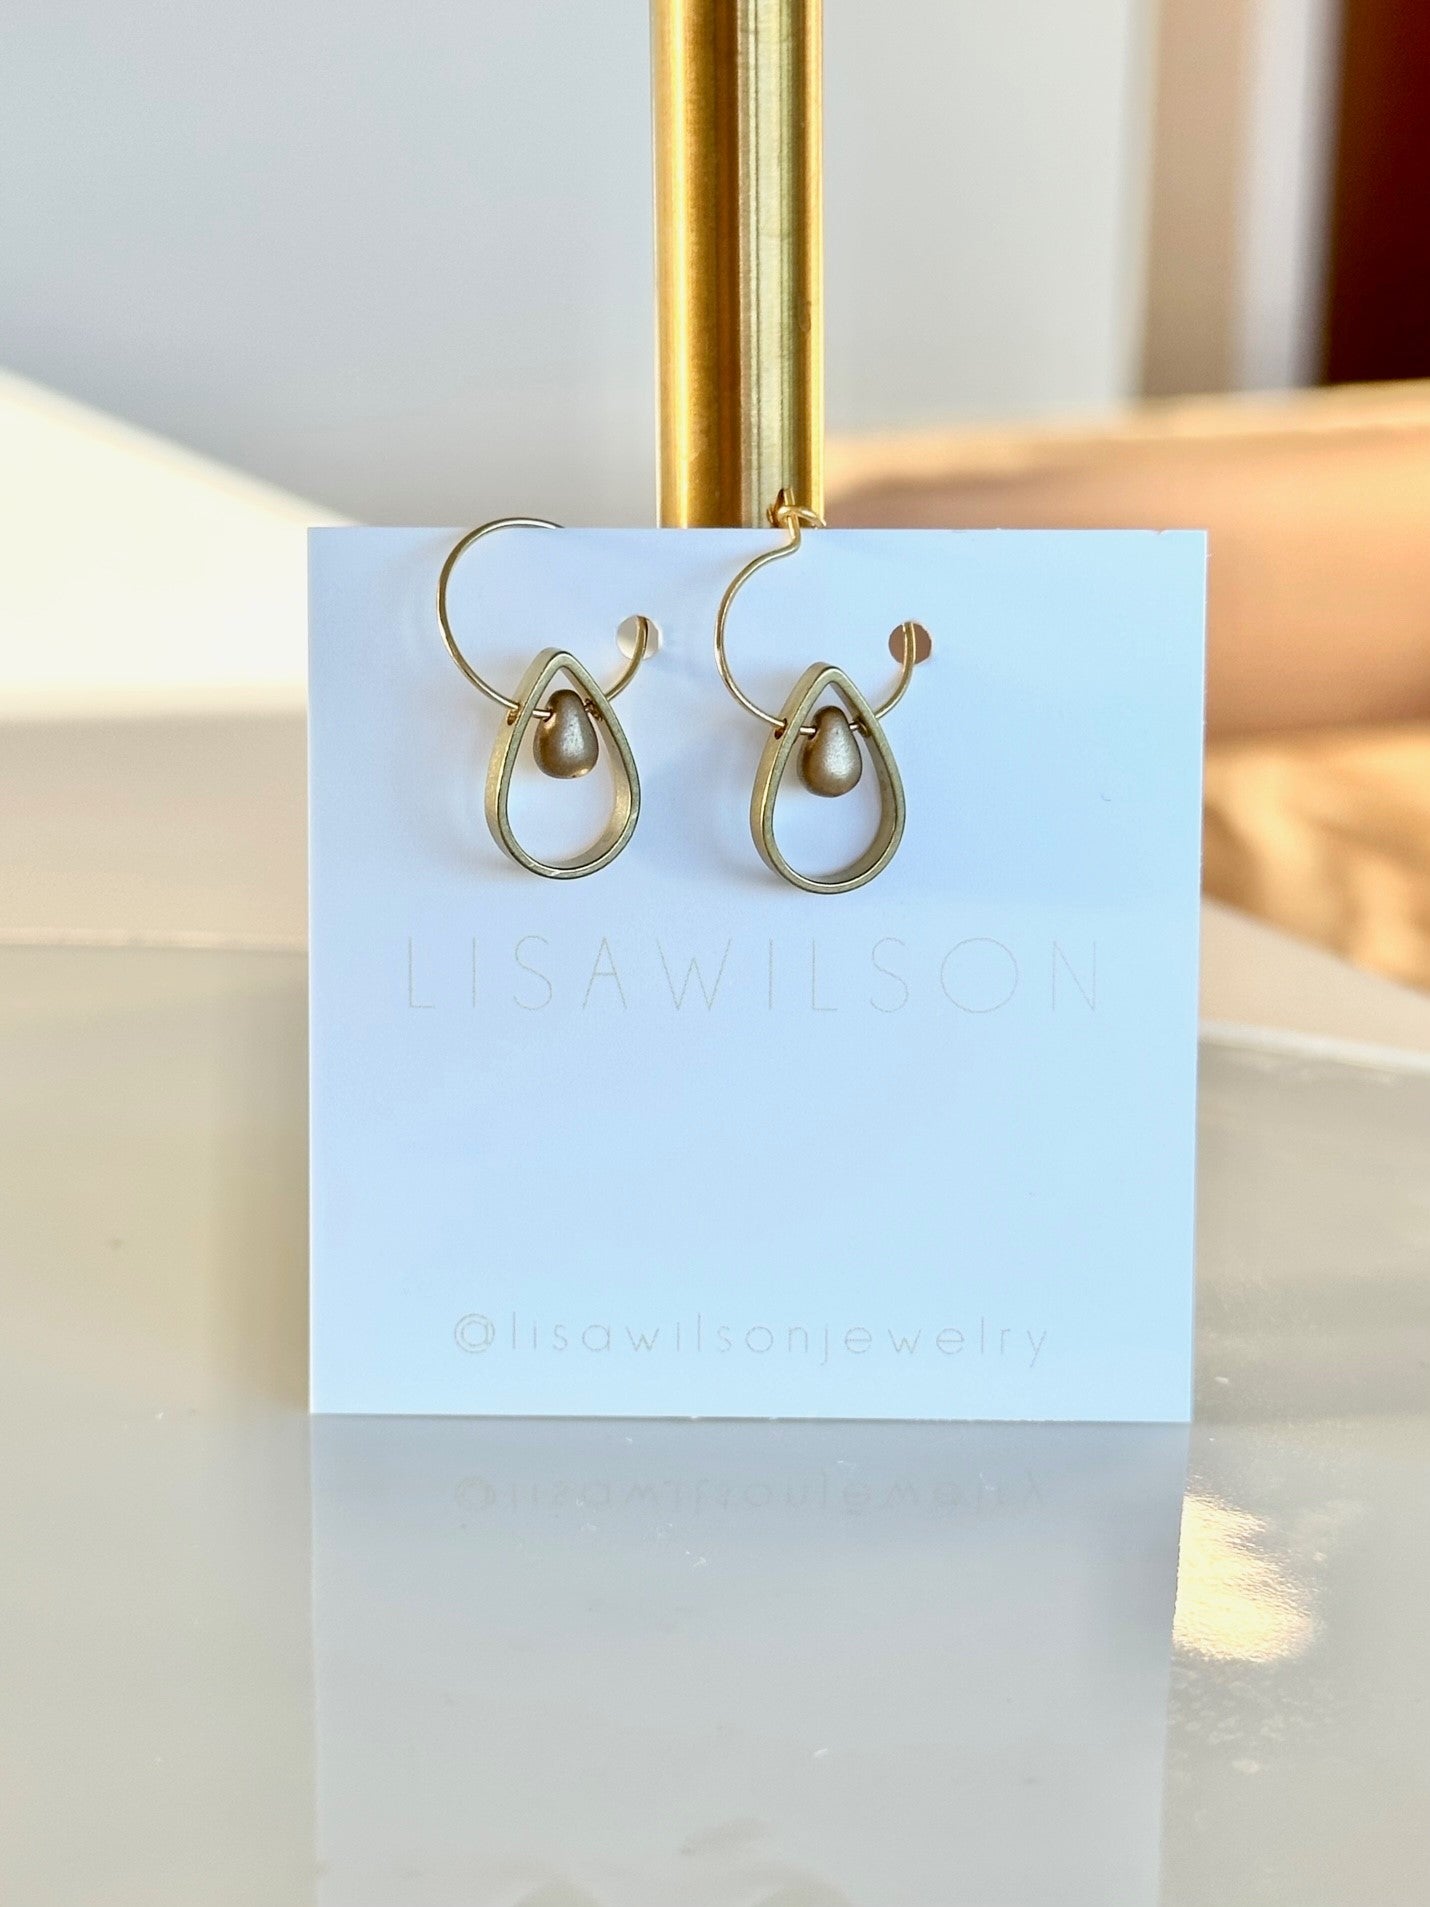 Small Brass Hoop Earrings with Teardrop Cutout and Droplet Bead